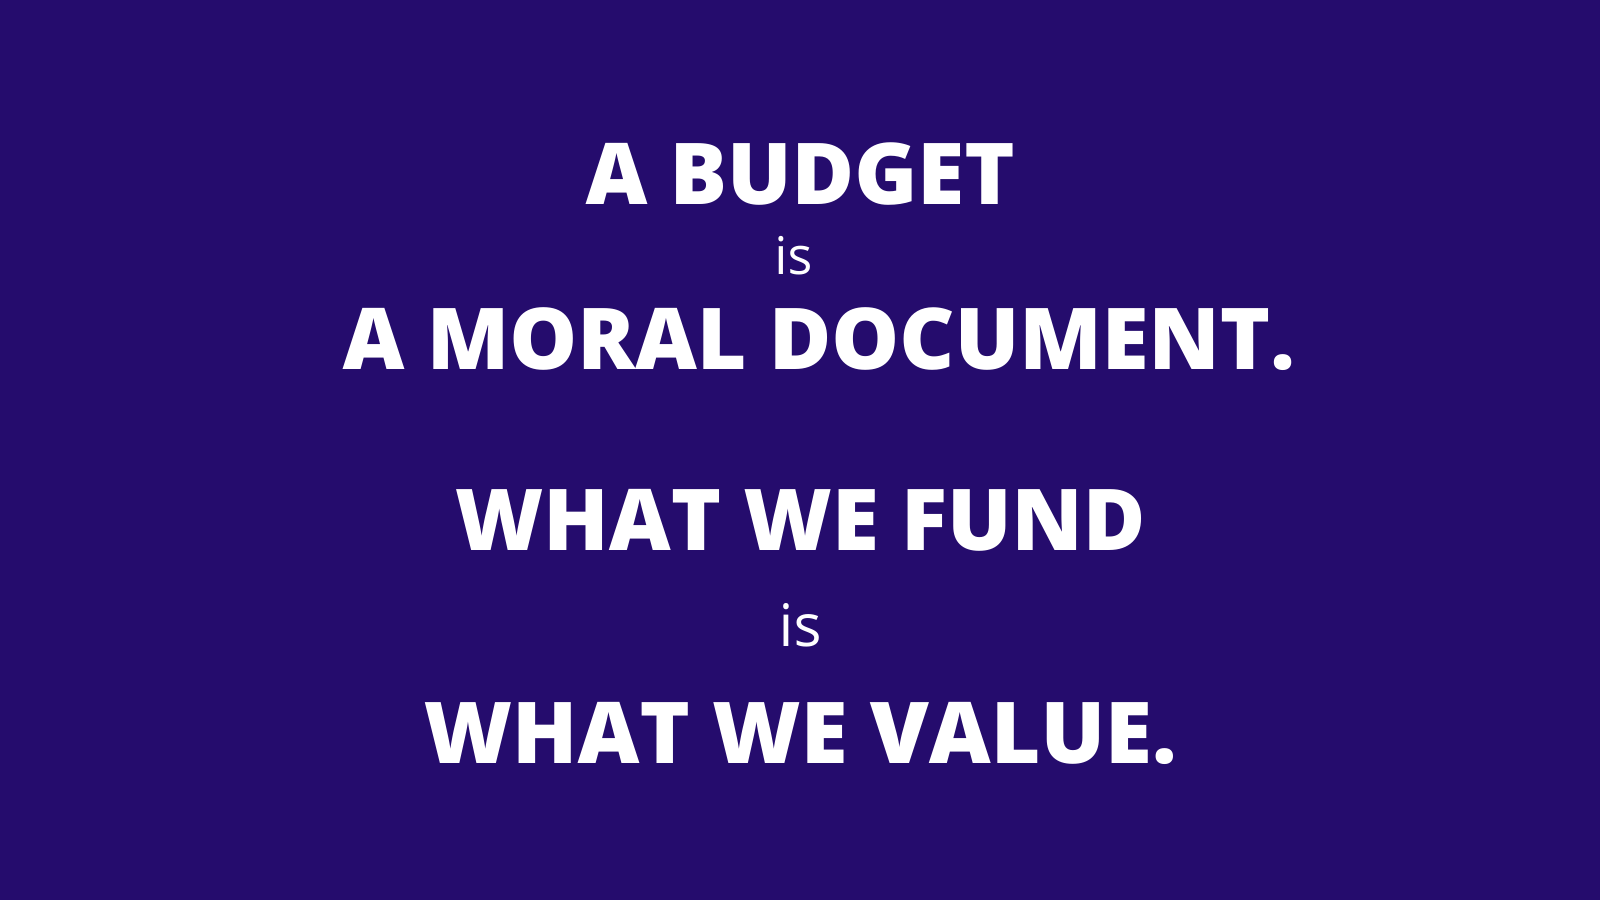 A budget is a moral document